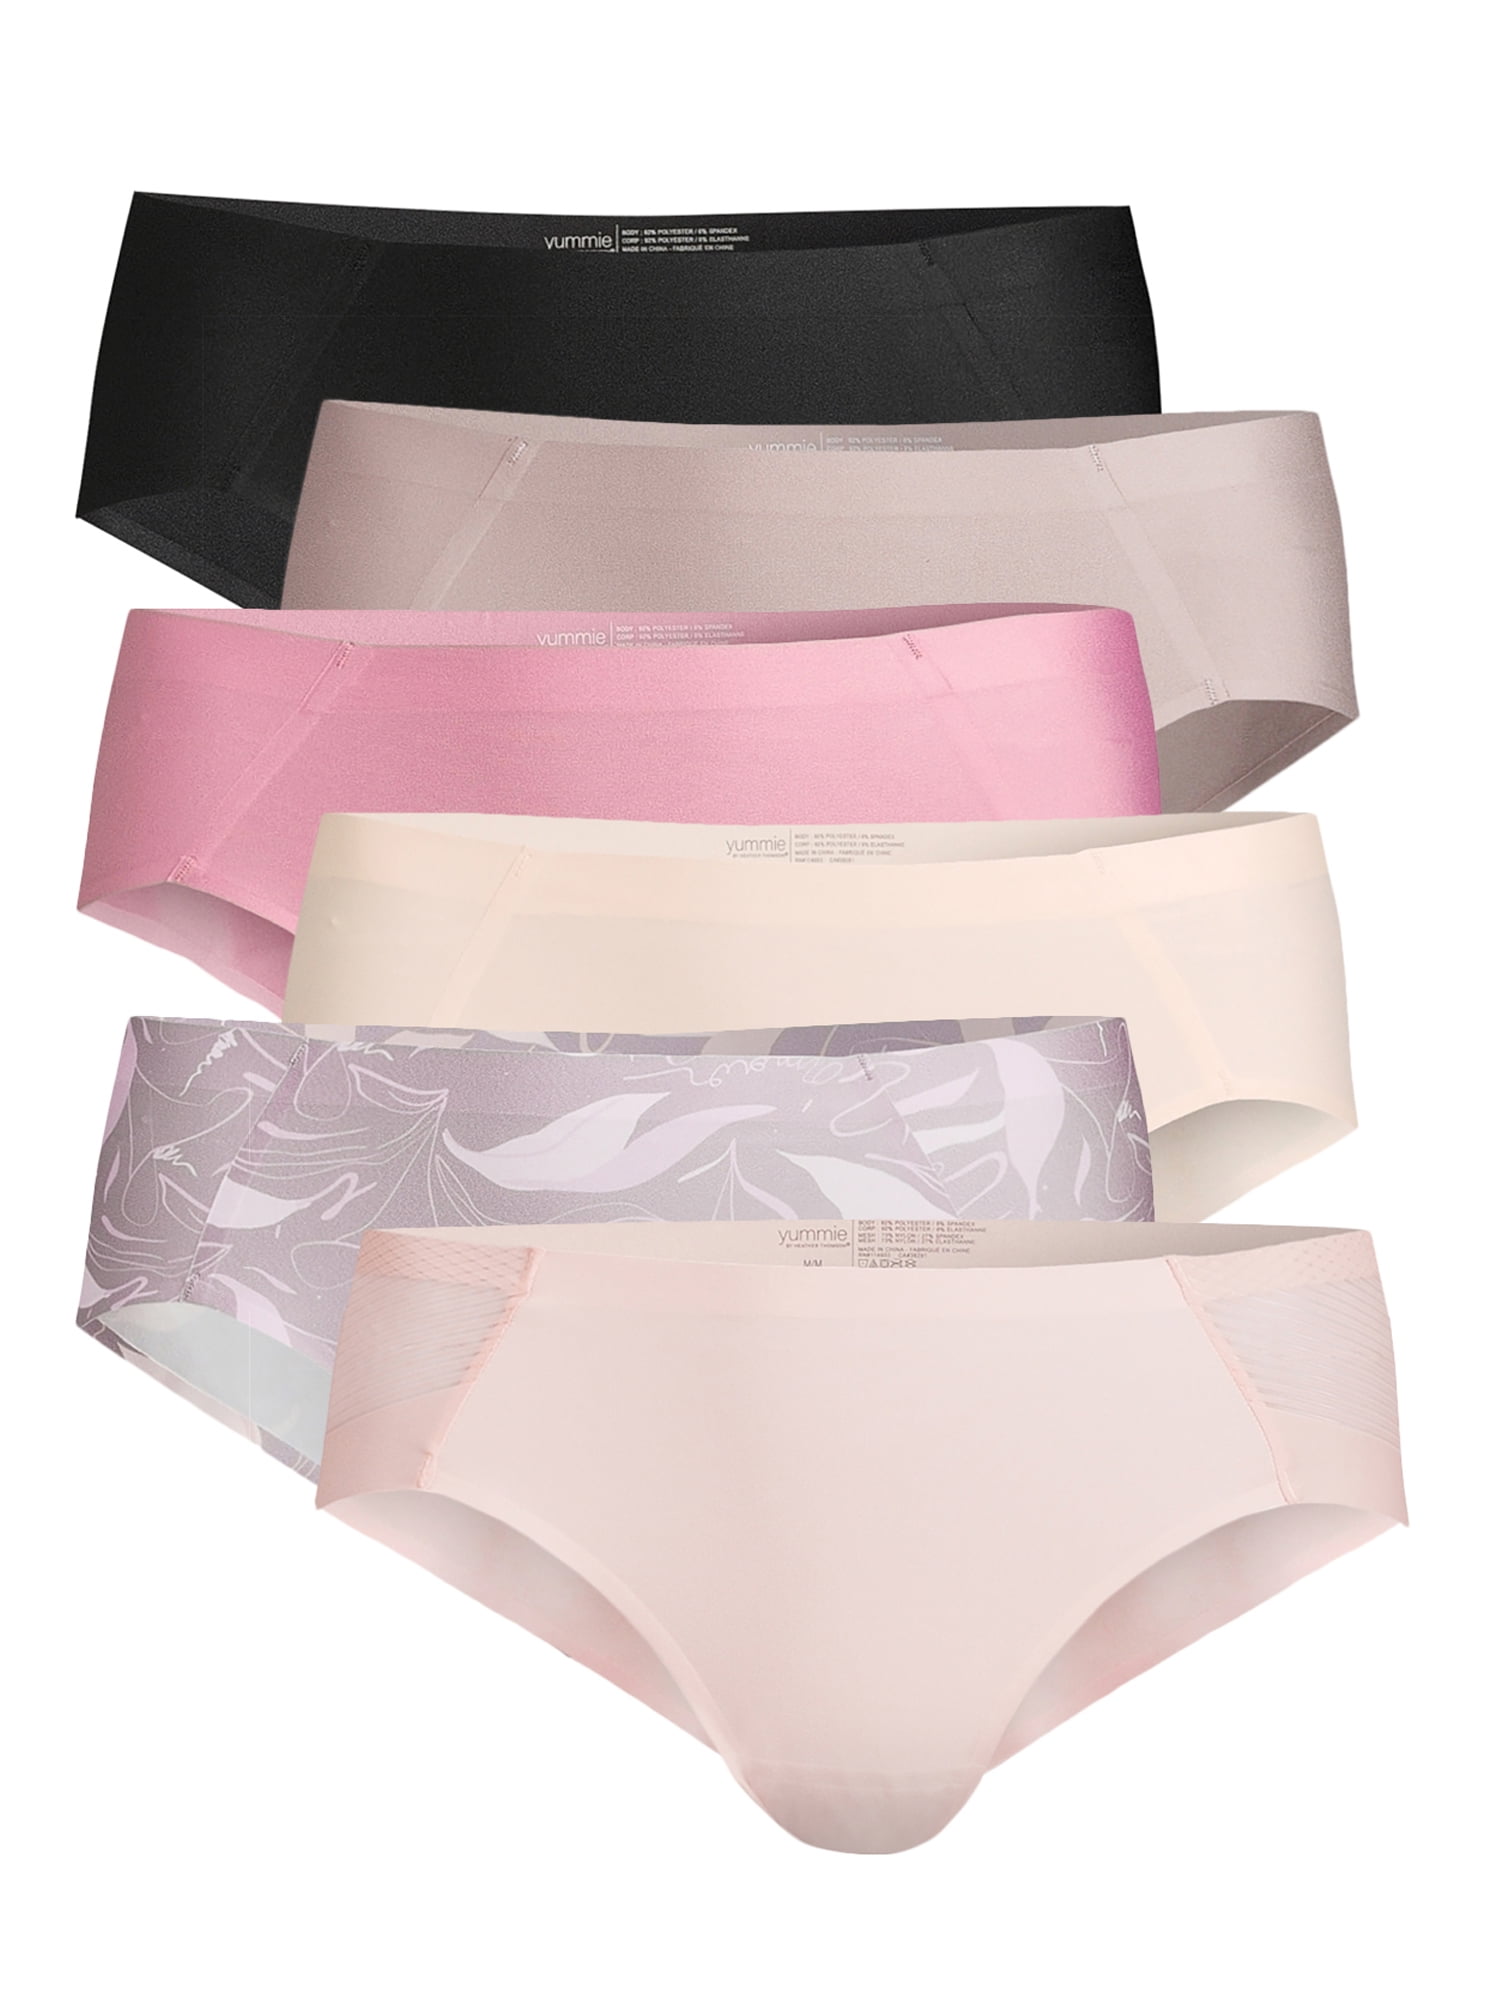 Yummie by Heather Thomson Women's Bonded Seamless Hipster Panties, 6 Pack